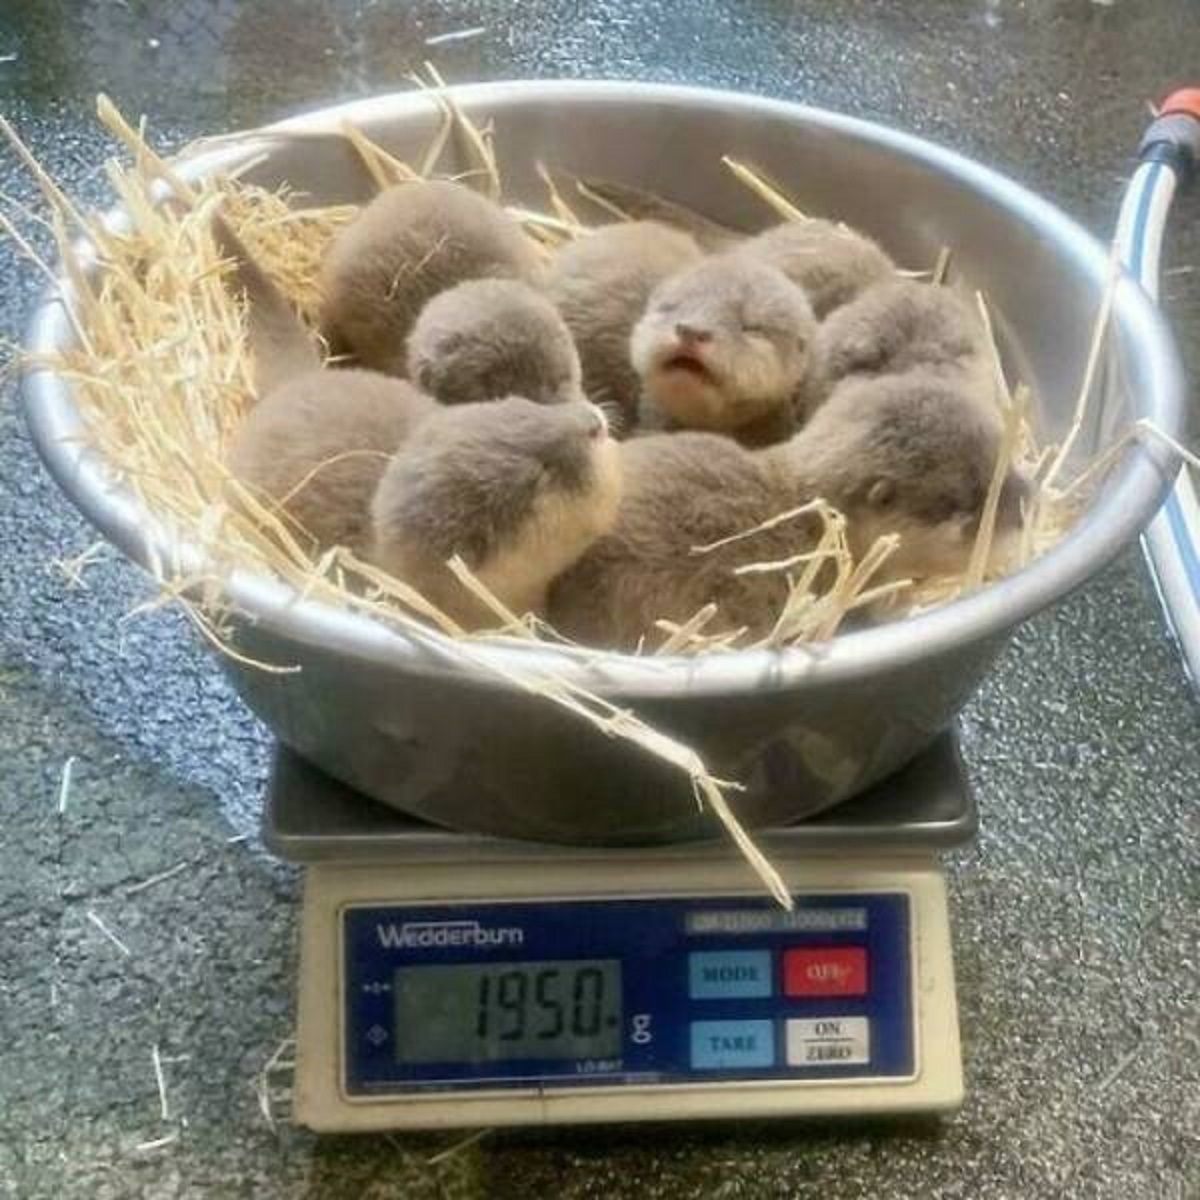 "A Bowl Of Baby Otters Being Weighed"